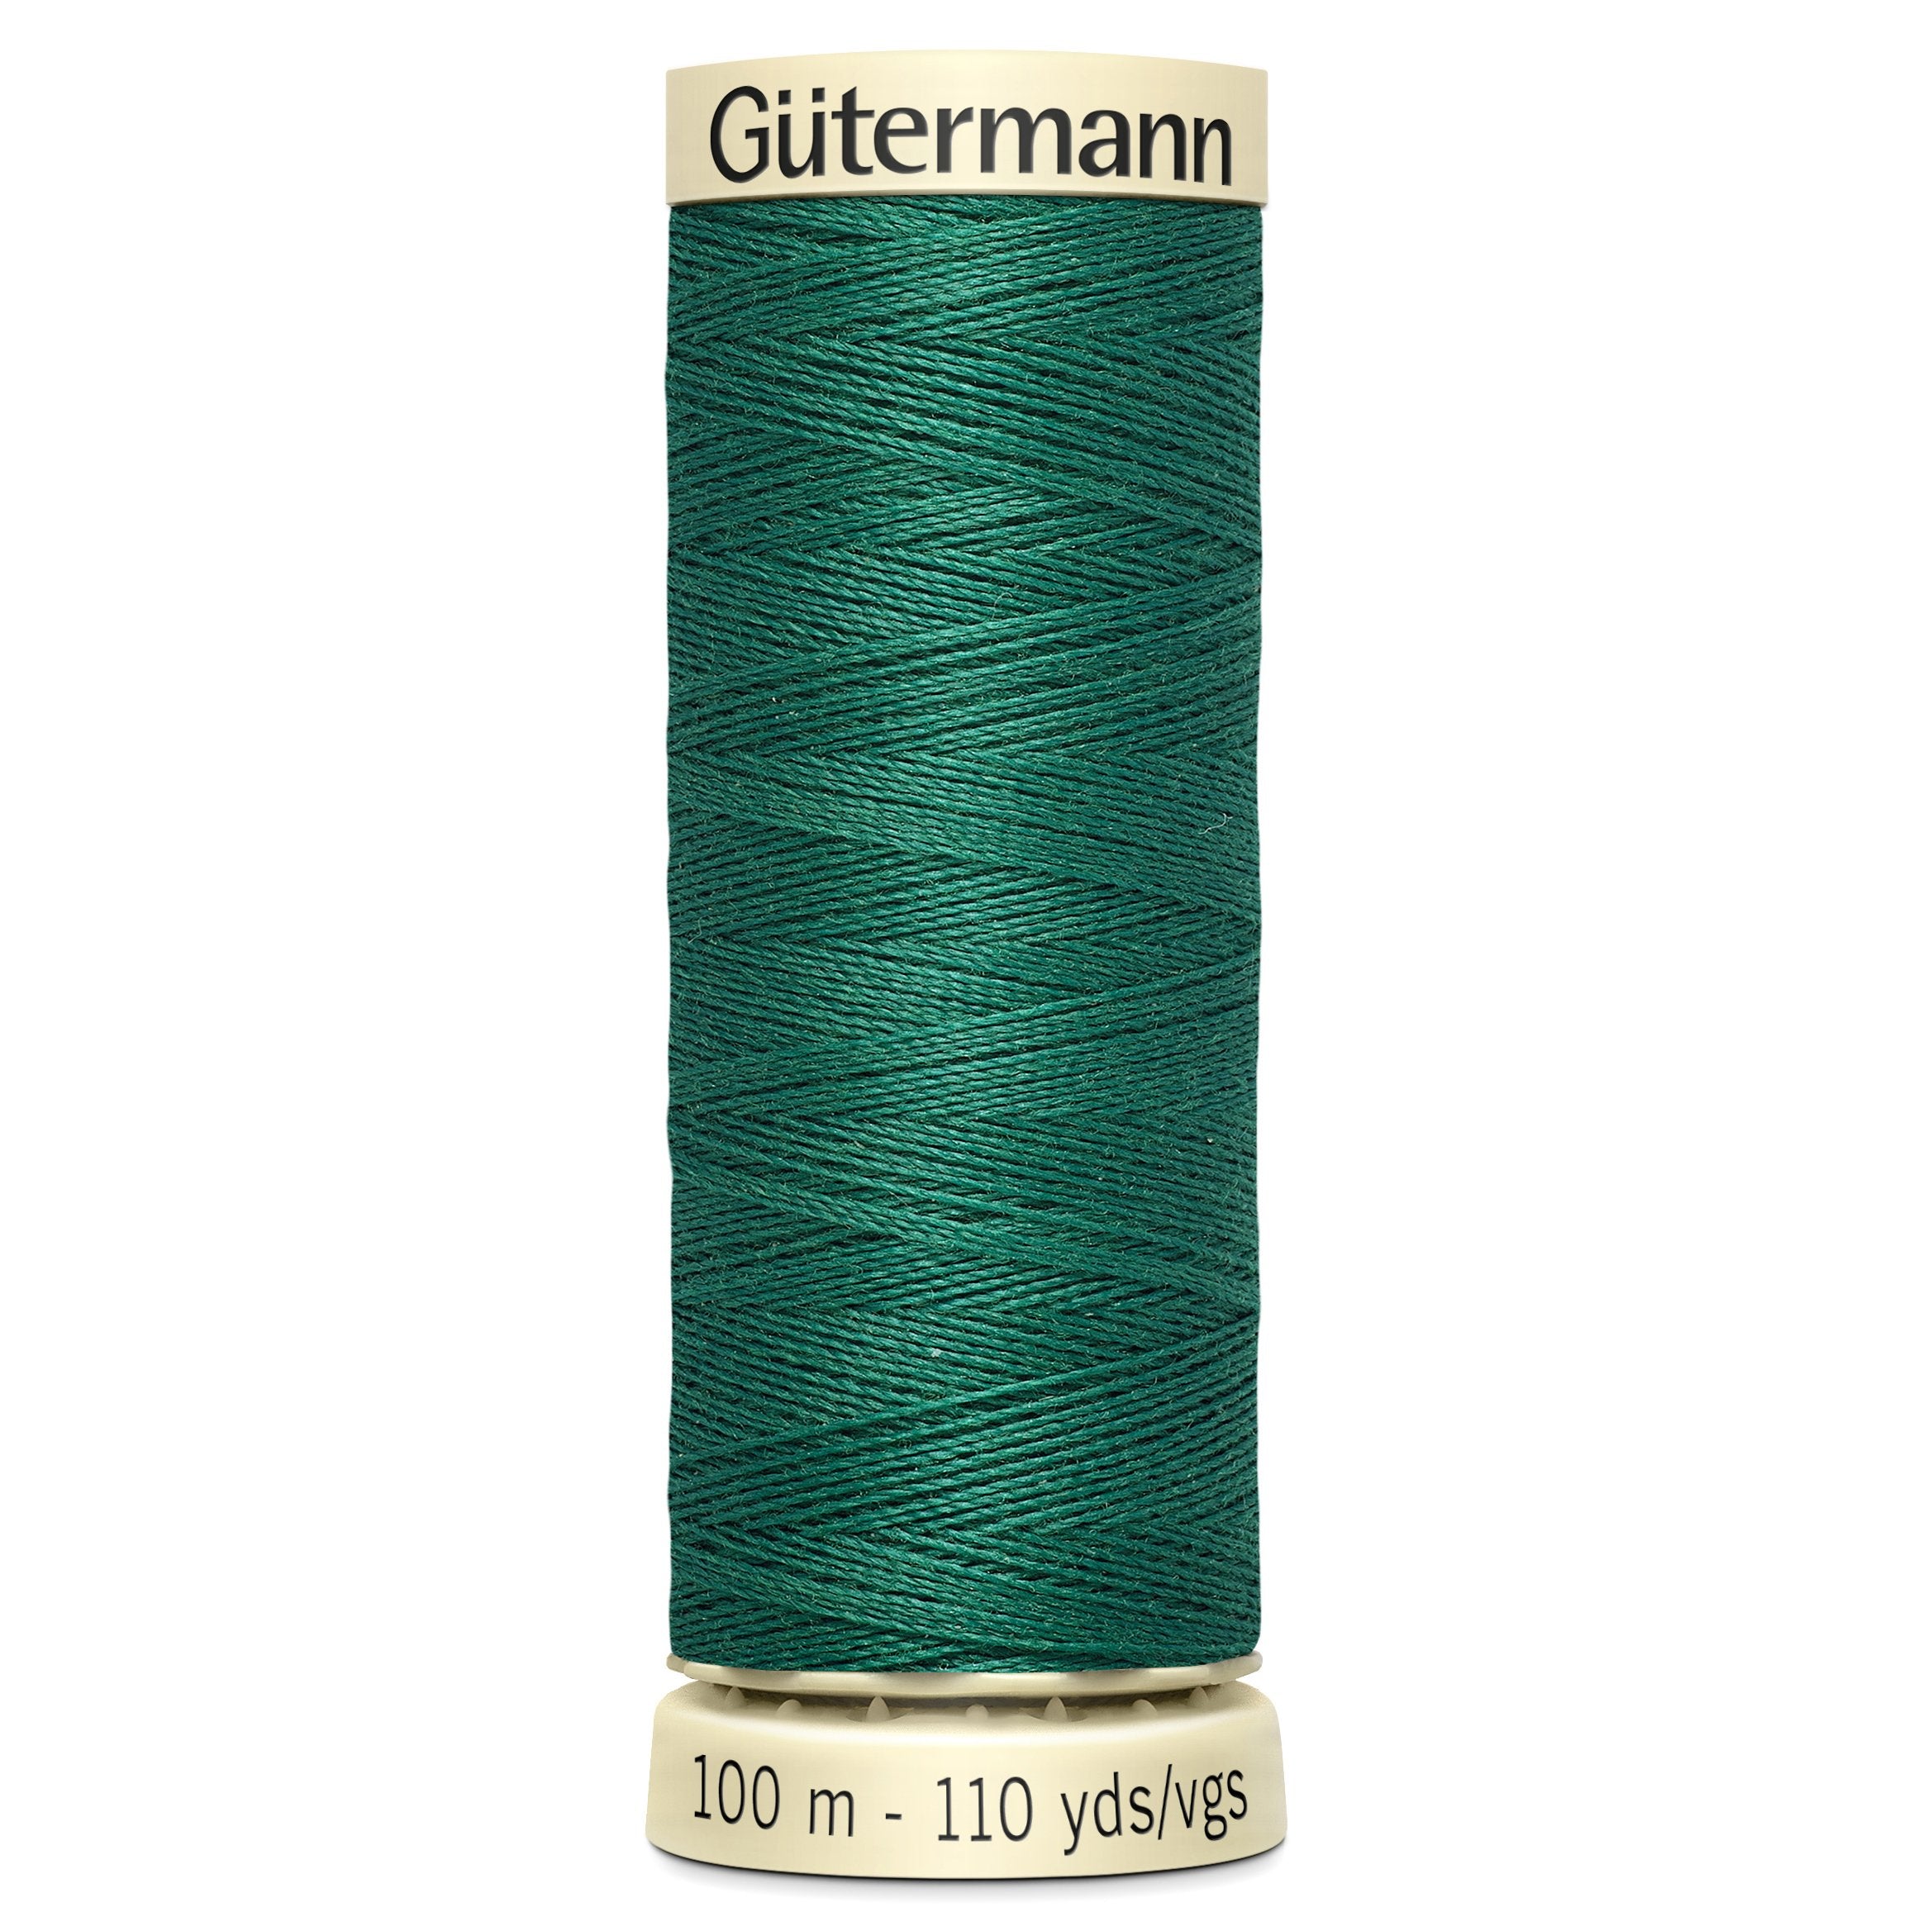 Gutermann Sew All Thread colour 916 Emerald Green from Jaycotts Sewing Supplies